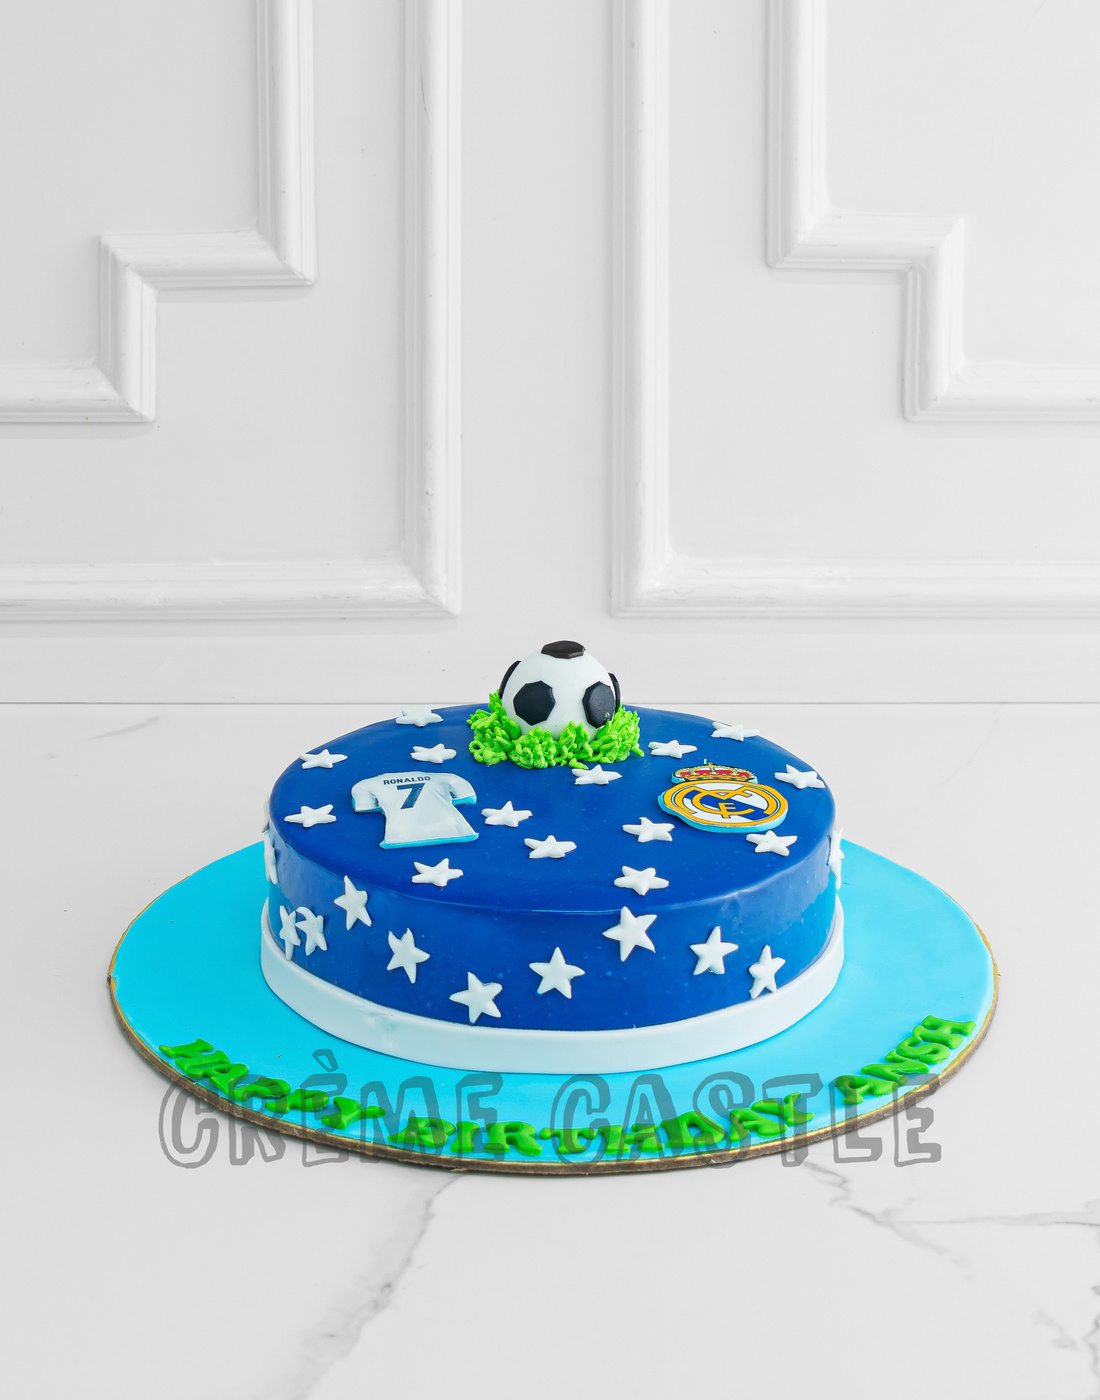 A cake for a hardcore football fan who loves Real Madrid – Creme ...